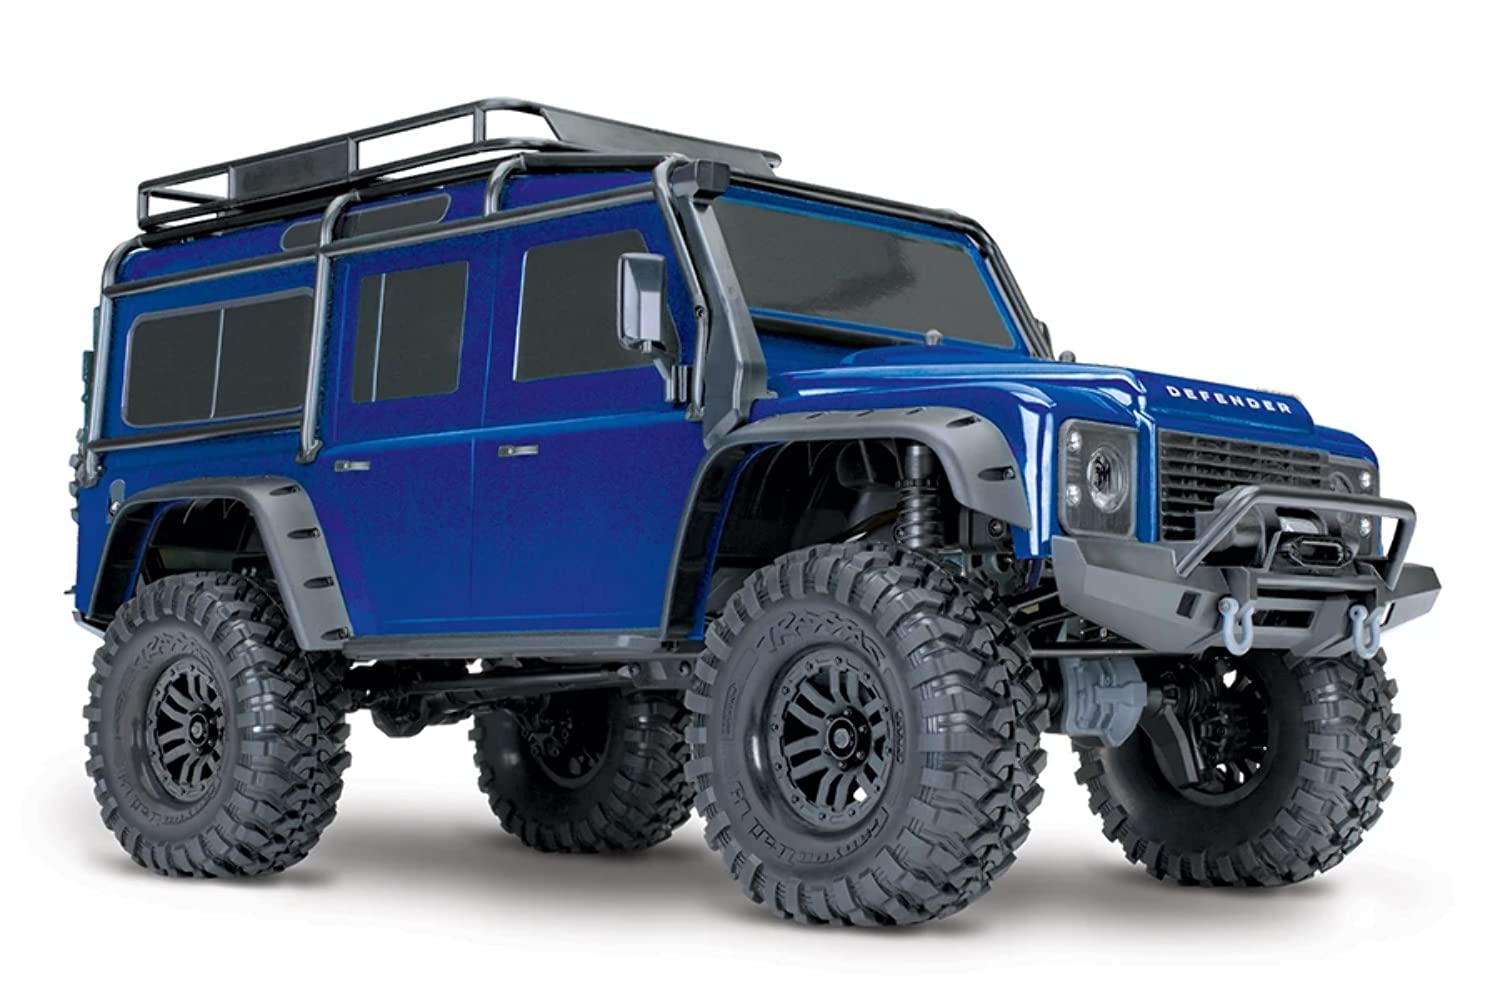 Traxxas 82056-4-BLUE TRX-4 Scale and Trail crawler with Land Rover Defender Body